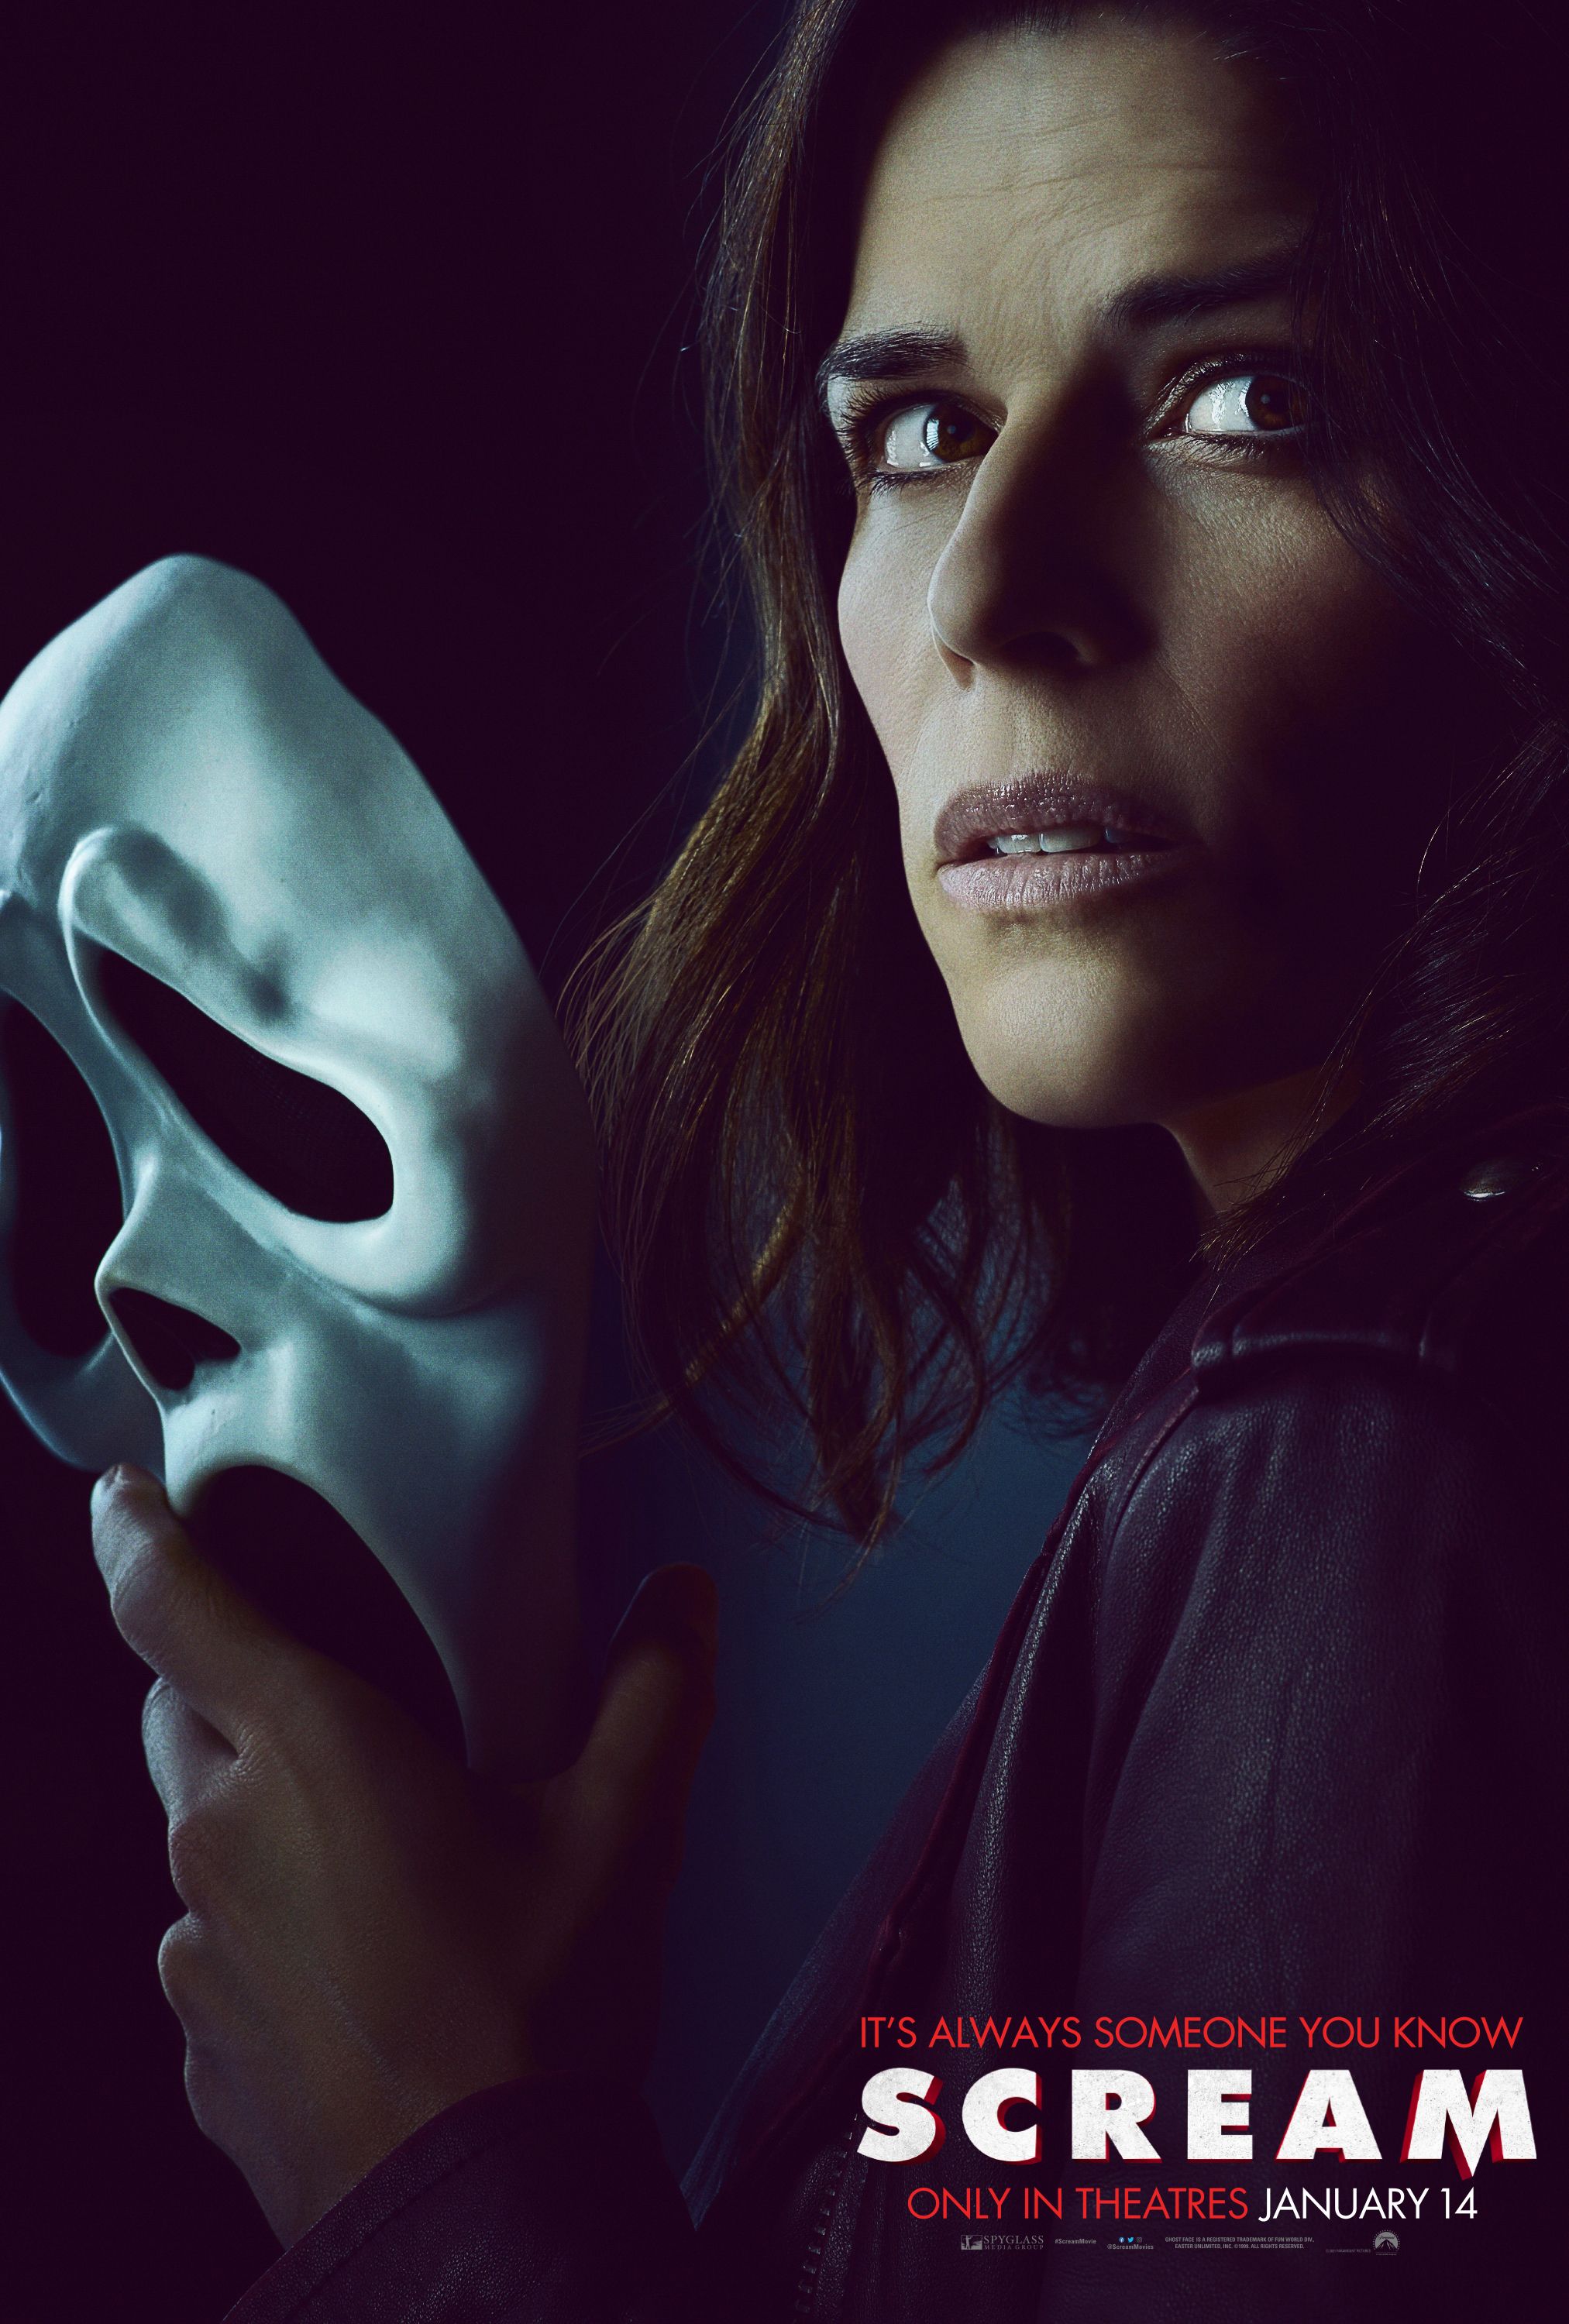 Scream 5 Posters Feature Courteney Cox David Arquette And Neve Campbell